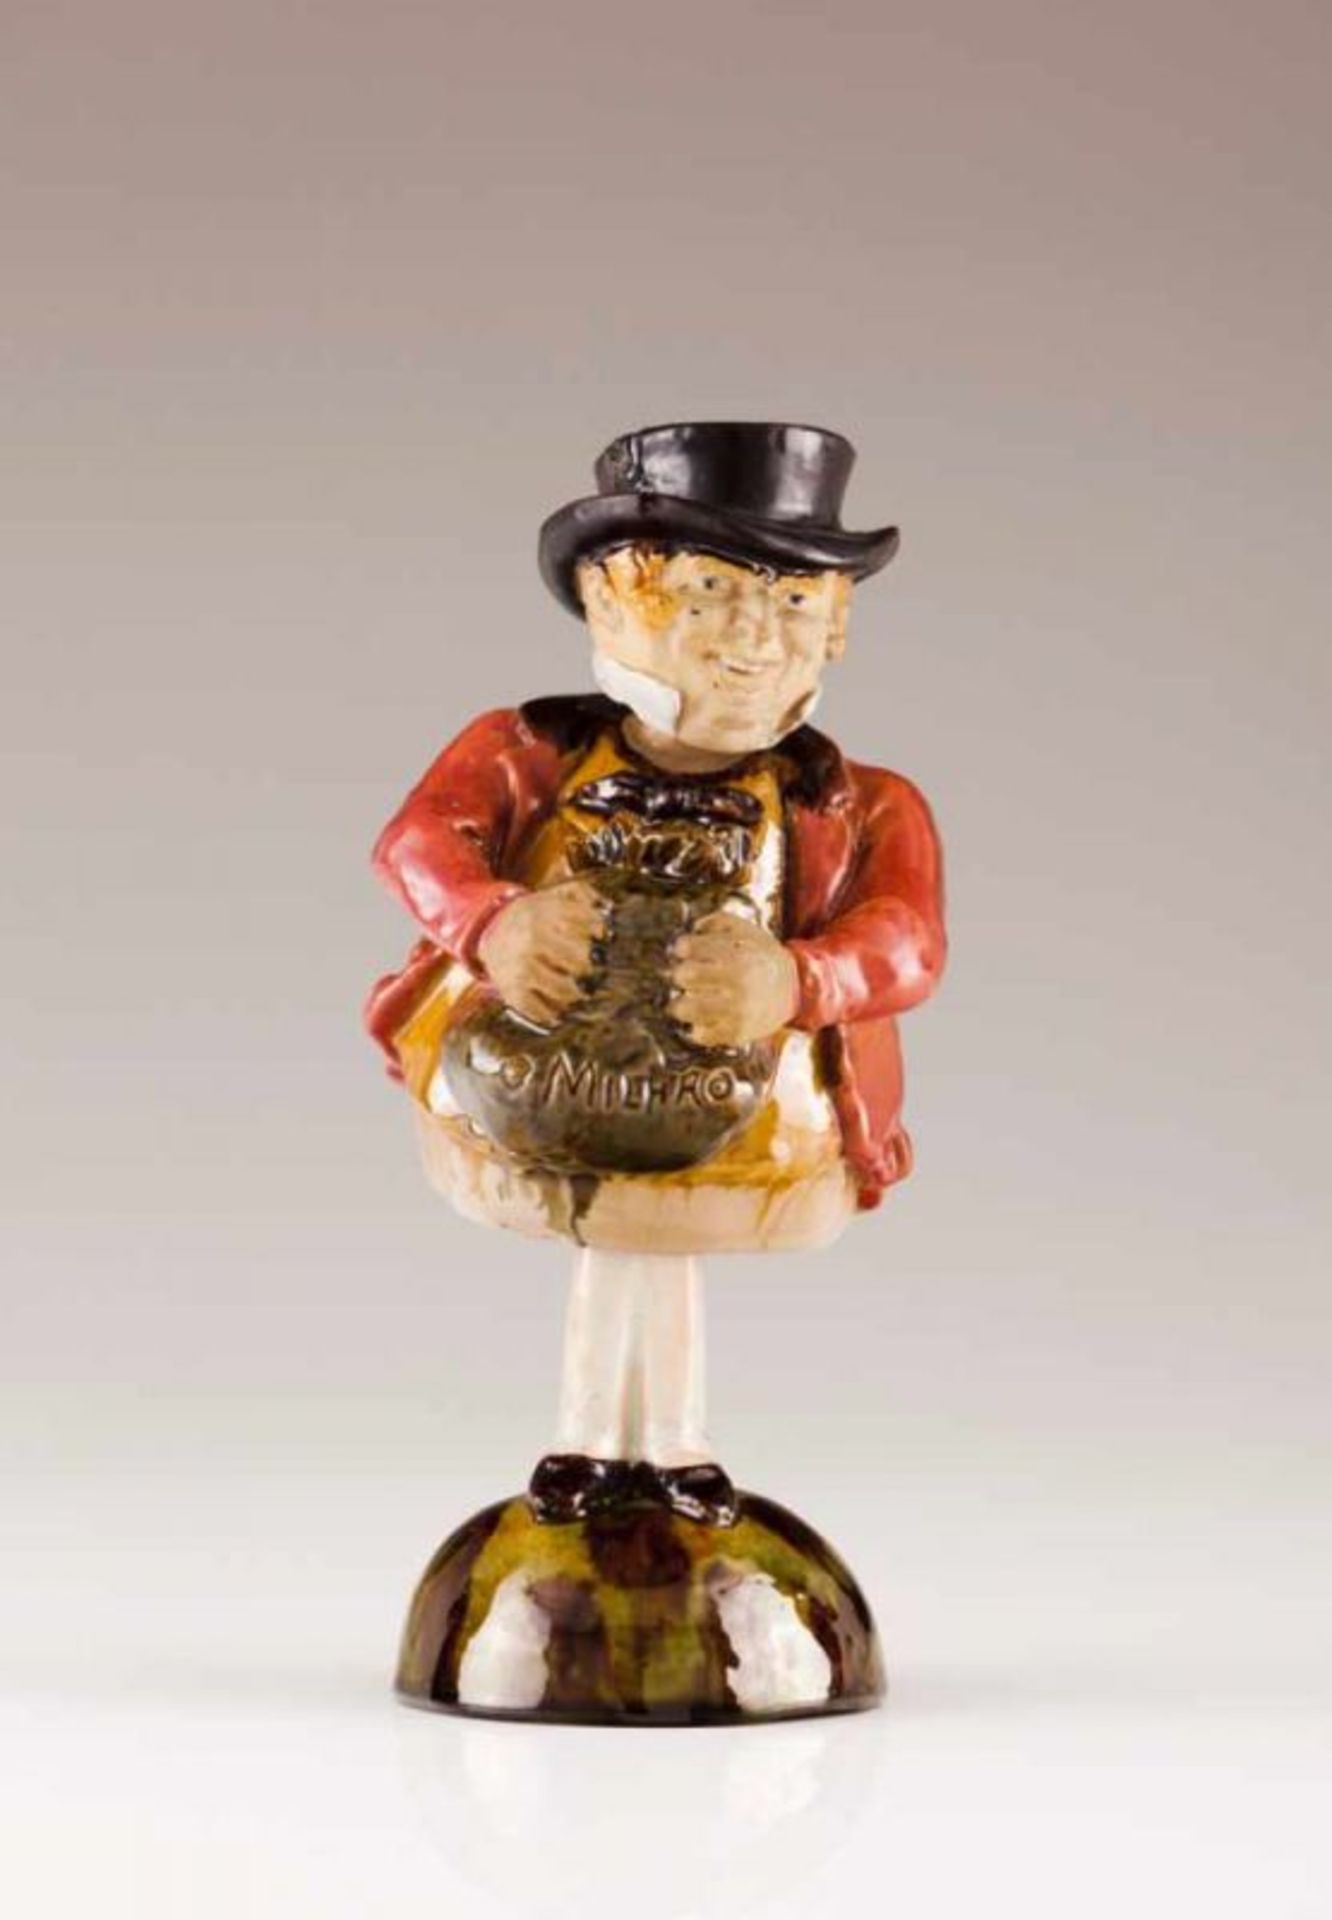 "The Million" An articulated Portuguese faience sculpture Representing "John Bull" holding a money